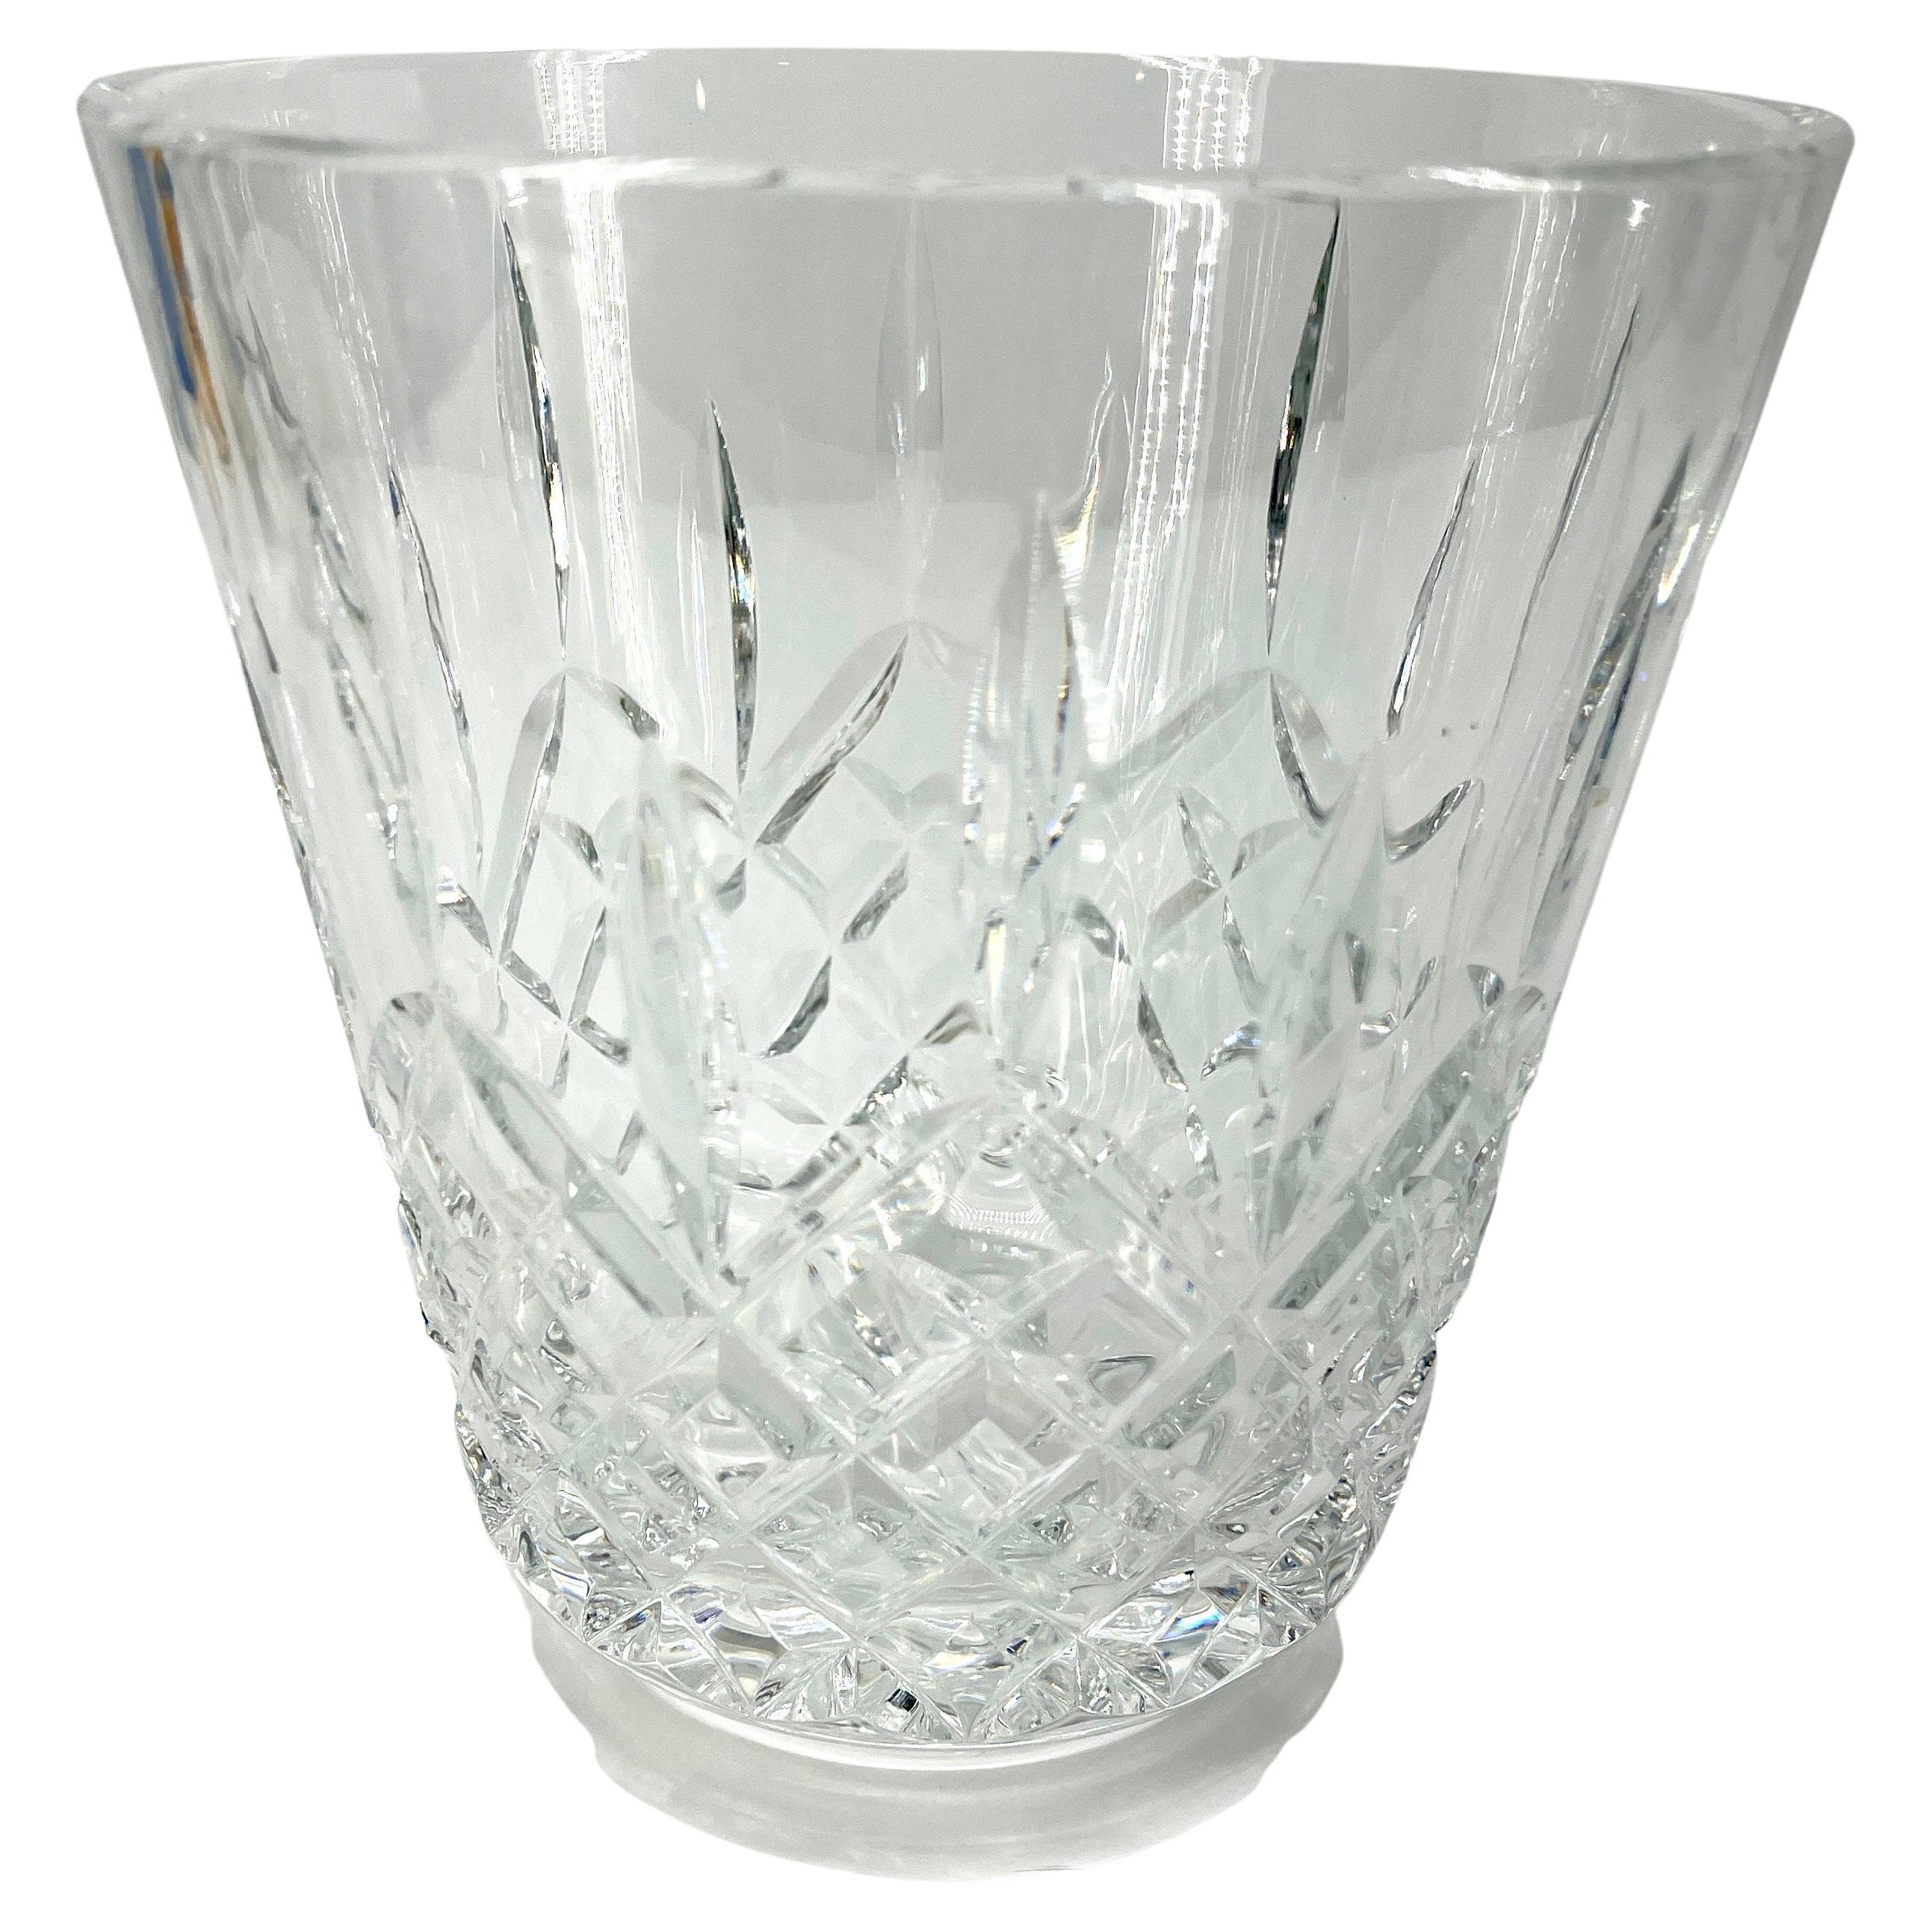 Lismore Crystal Ice Champagne Bucket, Waterford 

The Waterford Lismore pattern is a stunning combination of brilliance and clarity, characterized by the stunning clarity of Lismore's signature diamond and wedge cut crystal. The crisp coolness of